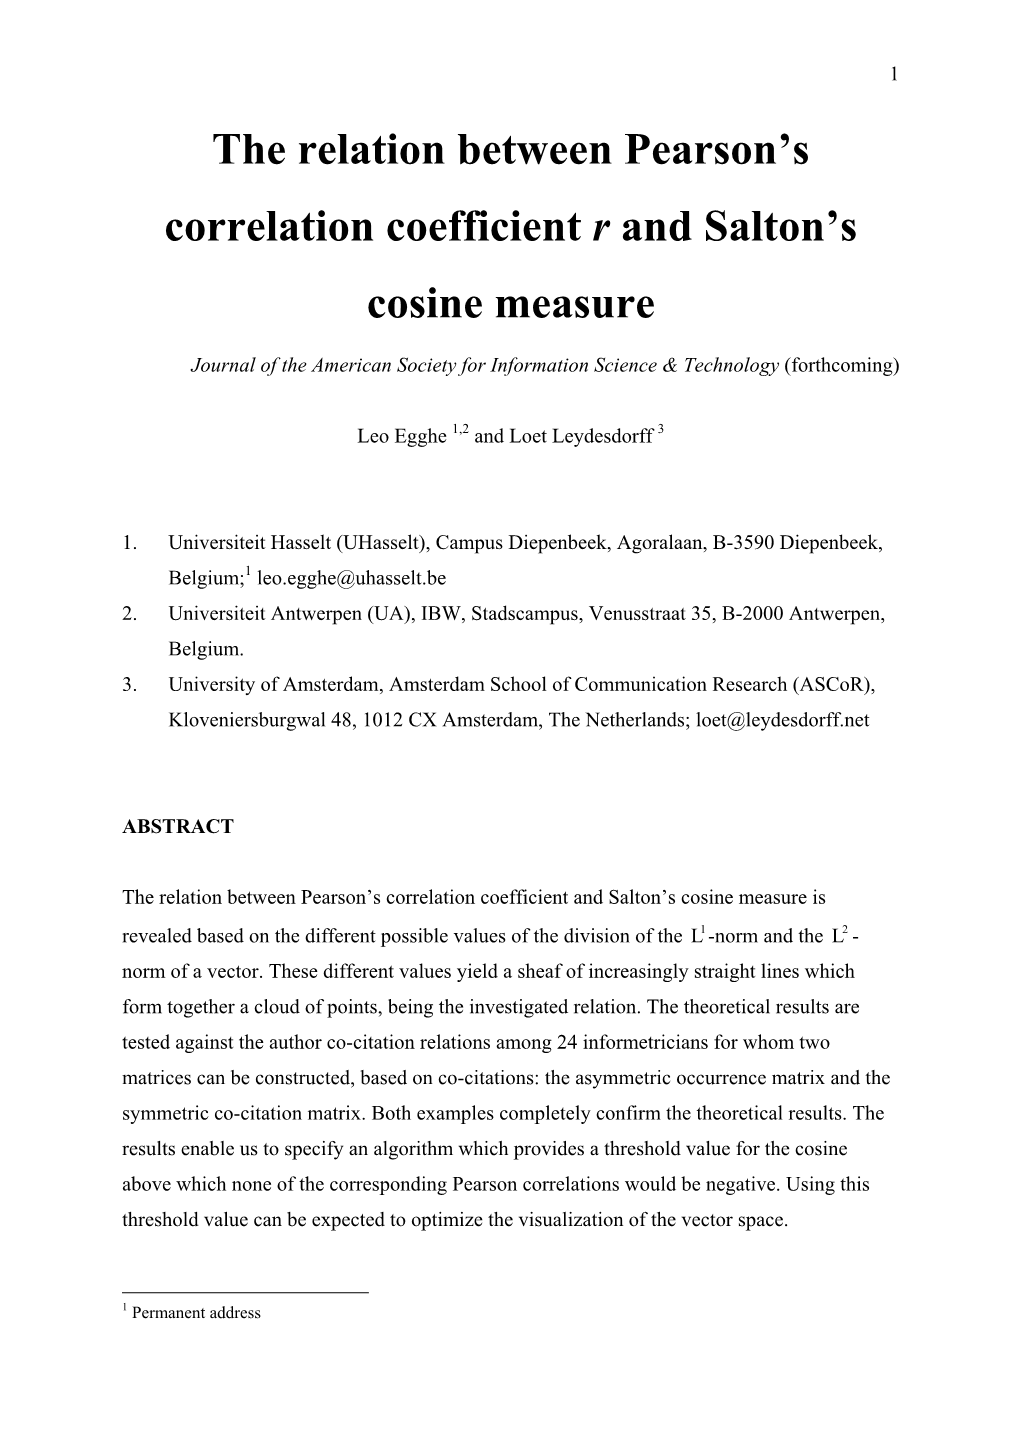 The Relation Between Pearson's Correlation Coefficient R and Salton's